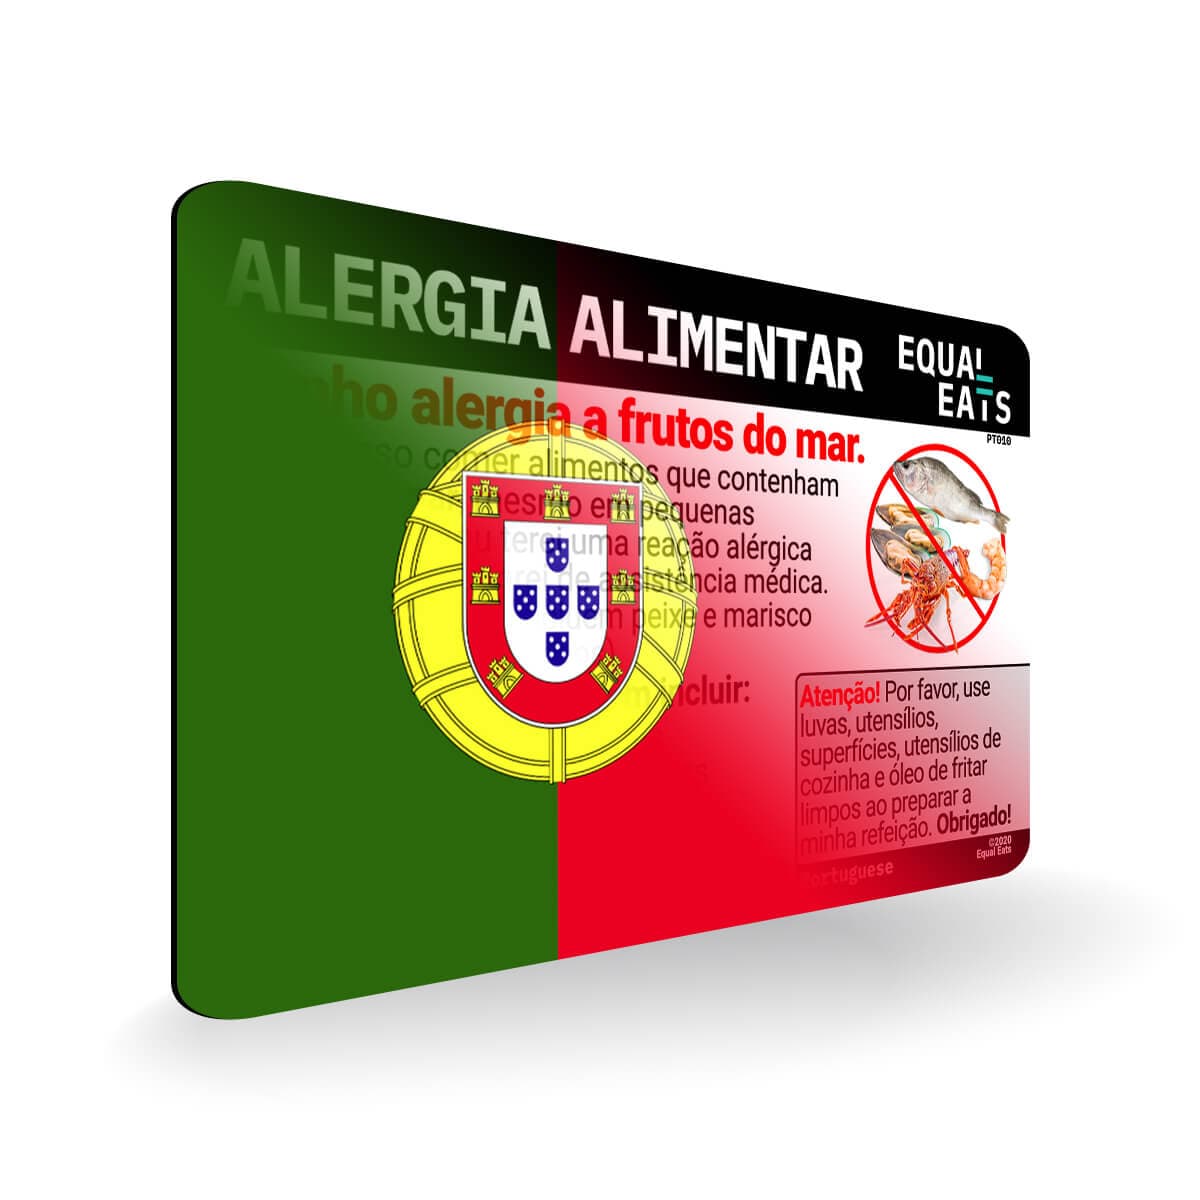 Seafood Allergy in Portuguese. Seafood Allergy Card for Portugal